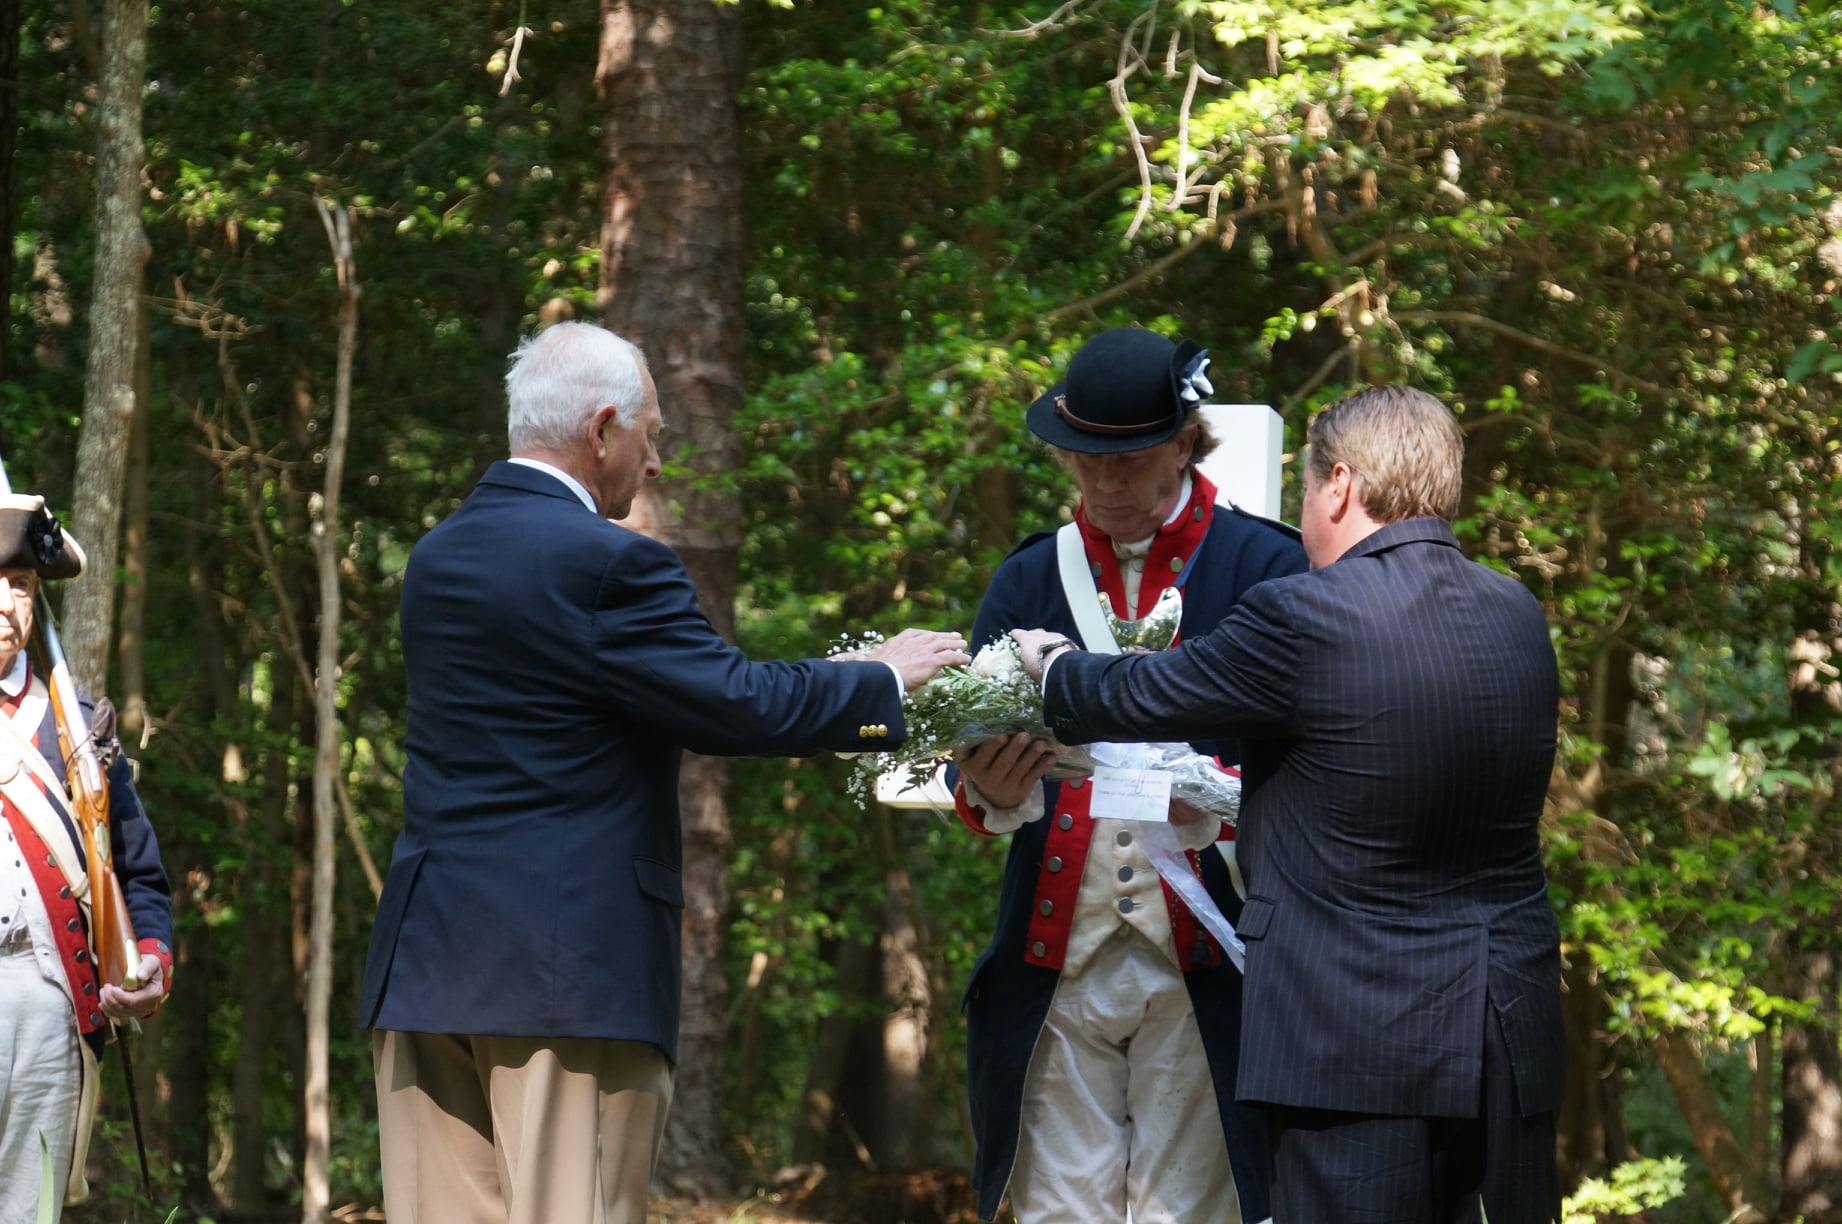 9.French Cemetery, Yorktown-May 26, 2021